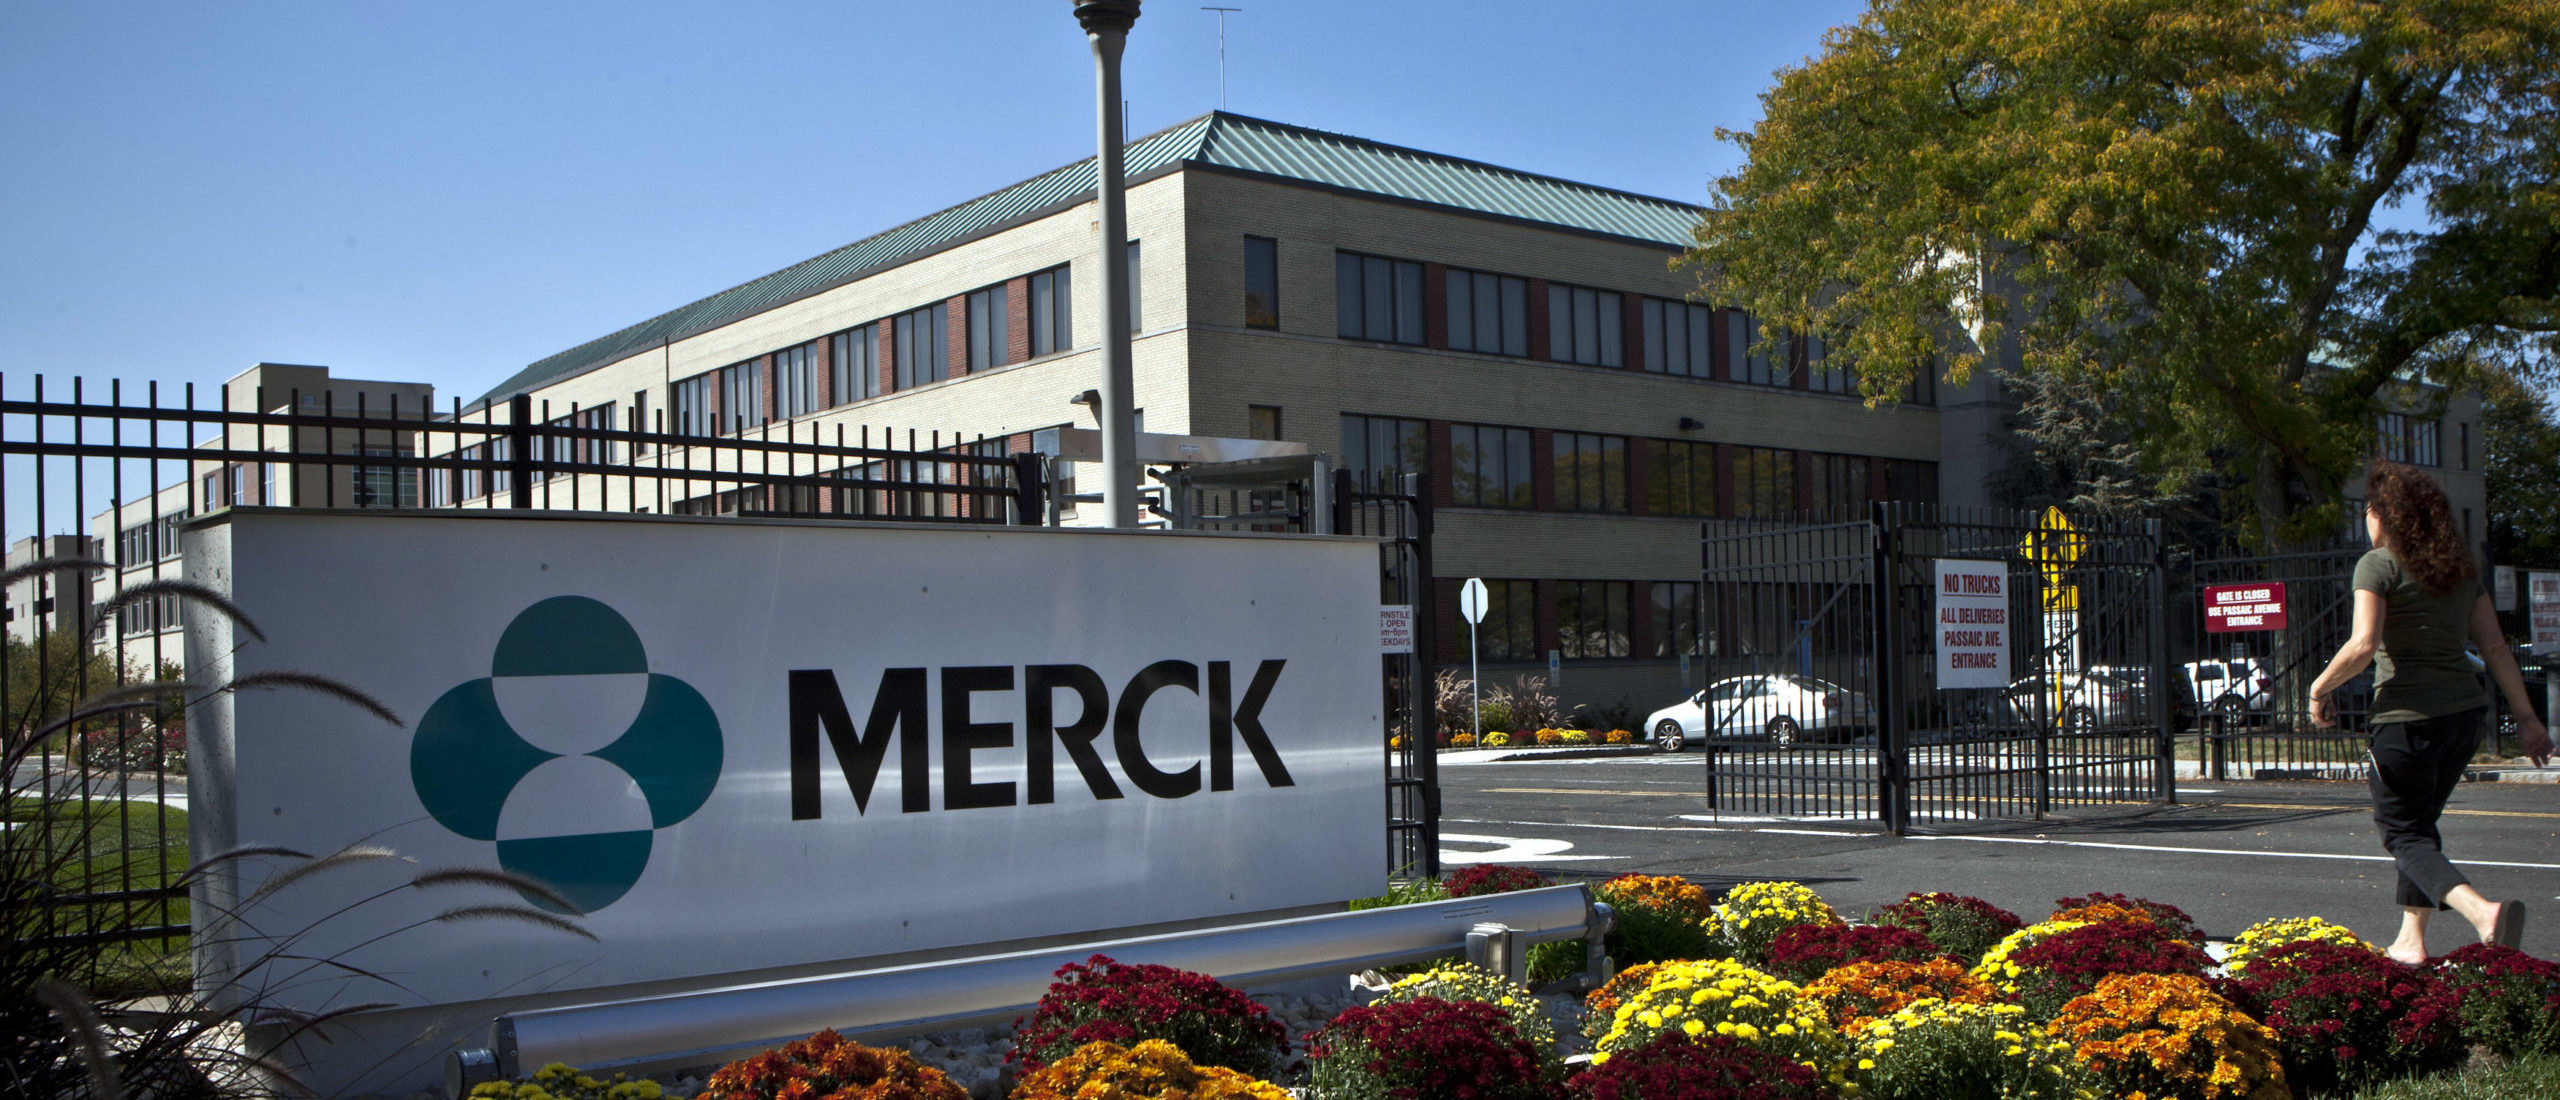 : A Merck sign stands in front of the company's building on October 2, 2013 in Summit, New Jersey. (Photo by Kena Betancur/Getty Images)